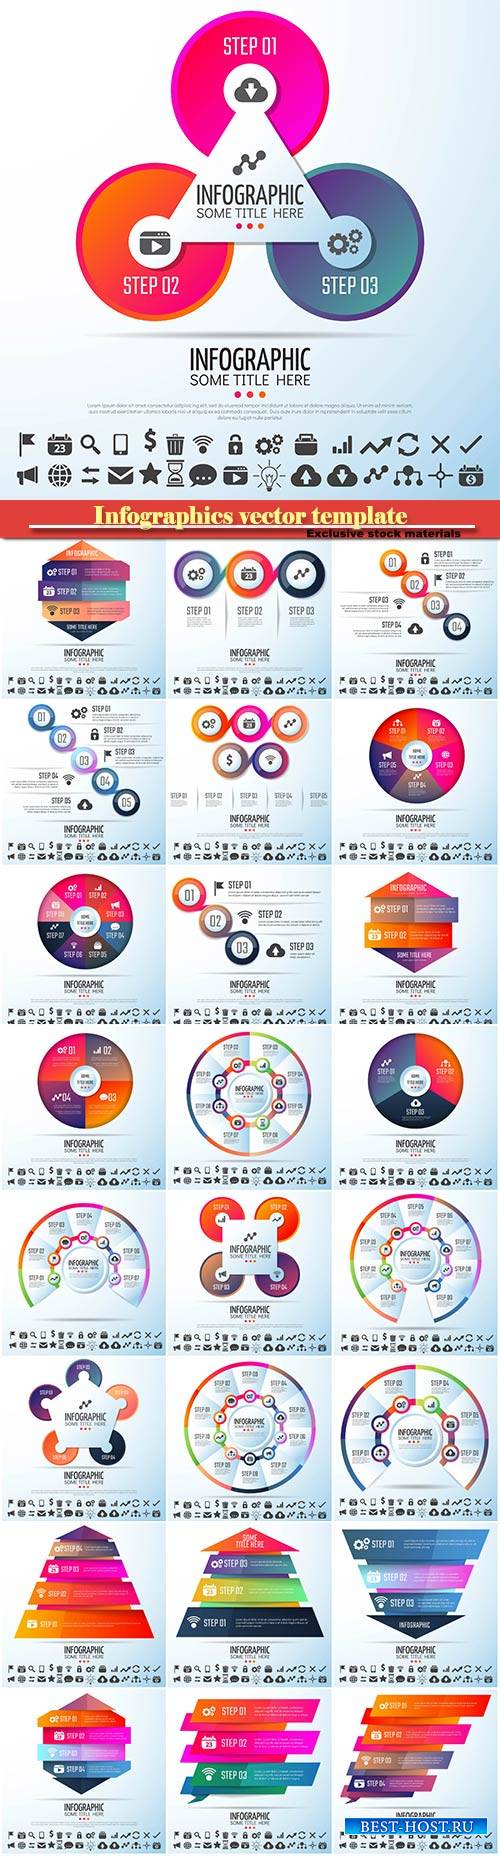 Infographics vector template for business presentations or information banner # 5